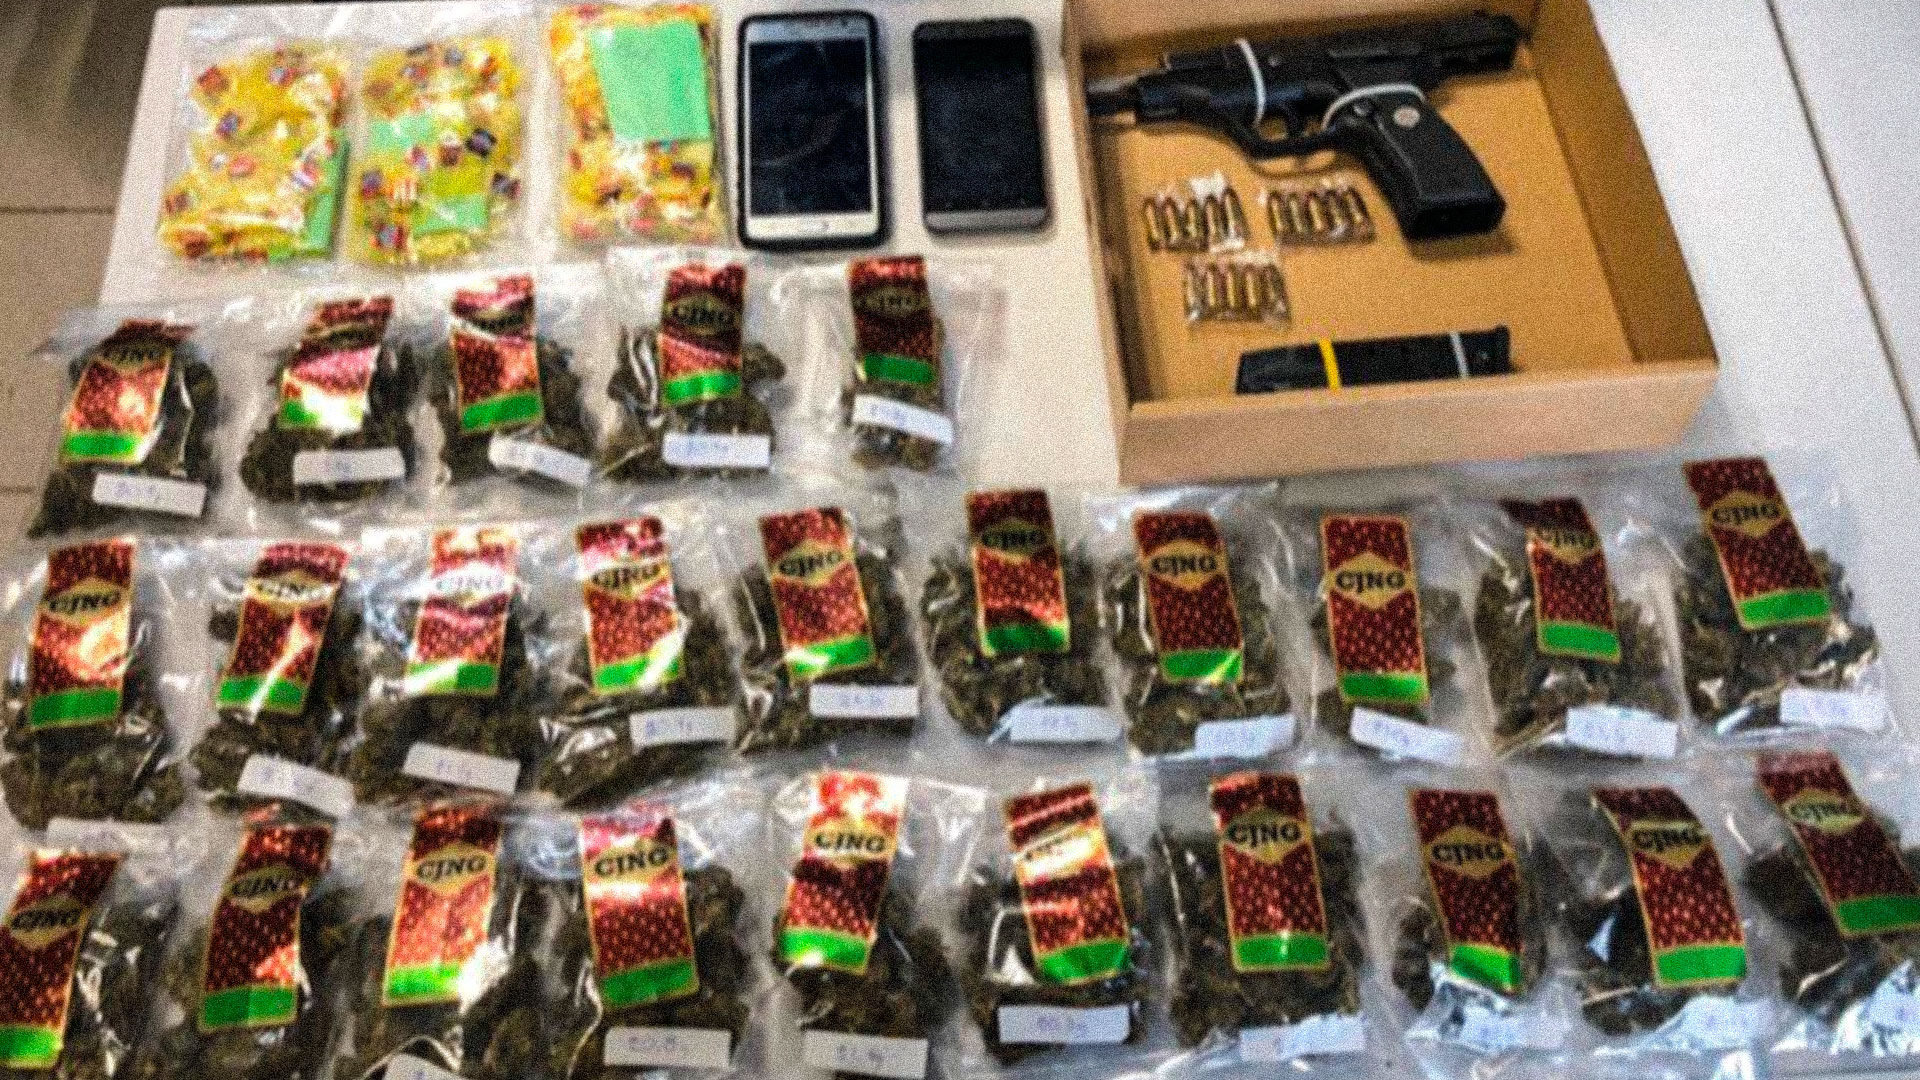 CJNG weapons and drugs seized in Irapuato.  Marijuana is sold in packages with the initials of the cartel.